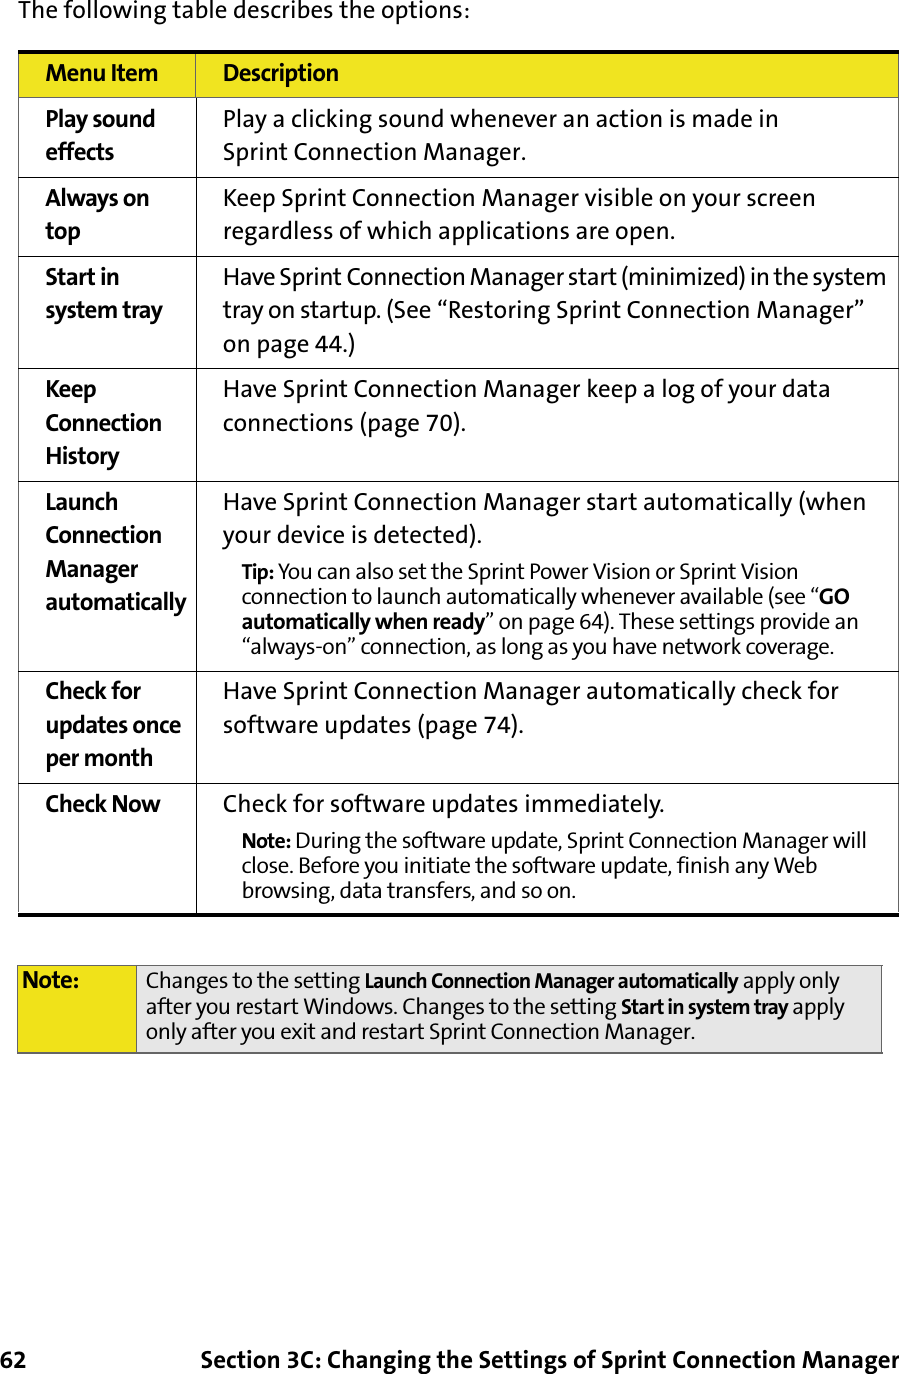 62 Section 3C: Changing the Settings of Sprint Connection ManagerThe following table describes the options:Menu Item DescriptionPlay sound effectsPlay a clicking sound whenever an action is made in Sprint Connection Manager.Always on topKeep Sprint Connection Manager visible on your screen regardless of which applications are open.Start in system trayHave Sprint Connection Manager start (minimized) in the system tray on startup. (See “Restoring Sprint Connection Manager” on page 44.)Keep Connection HistoryHave Sprint Connection Manager keep a log of your data connections (page 70).Launch Connection Manager automaticallyHave Sprint Connection Manager start automatically (when your device is detected).Tip: You can also set the Sprint Power Vision or Sprint Vision connection to launch automatically whenever available (see “GO automatically when ready” on page 64). These settings provide an “always-on” connection, as long as you have network coverage.Check for updates once per monthHave Sprint Connection Manager automatically check for software updates (page 74).Check Now Check for software updates immediately.Note: During the software update, Sprint Connection Manager will close. Before you initiate the software update, finish any Web browsing, data transfers, and so on.Note: Changes to the setting Launch Connection Manager automatically apply only after you restart Windows. Changes to the setting Start in system tray apply only after you exit and restart Sprint Connection Manager.